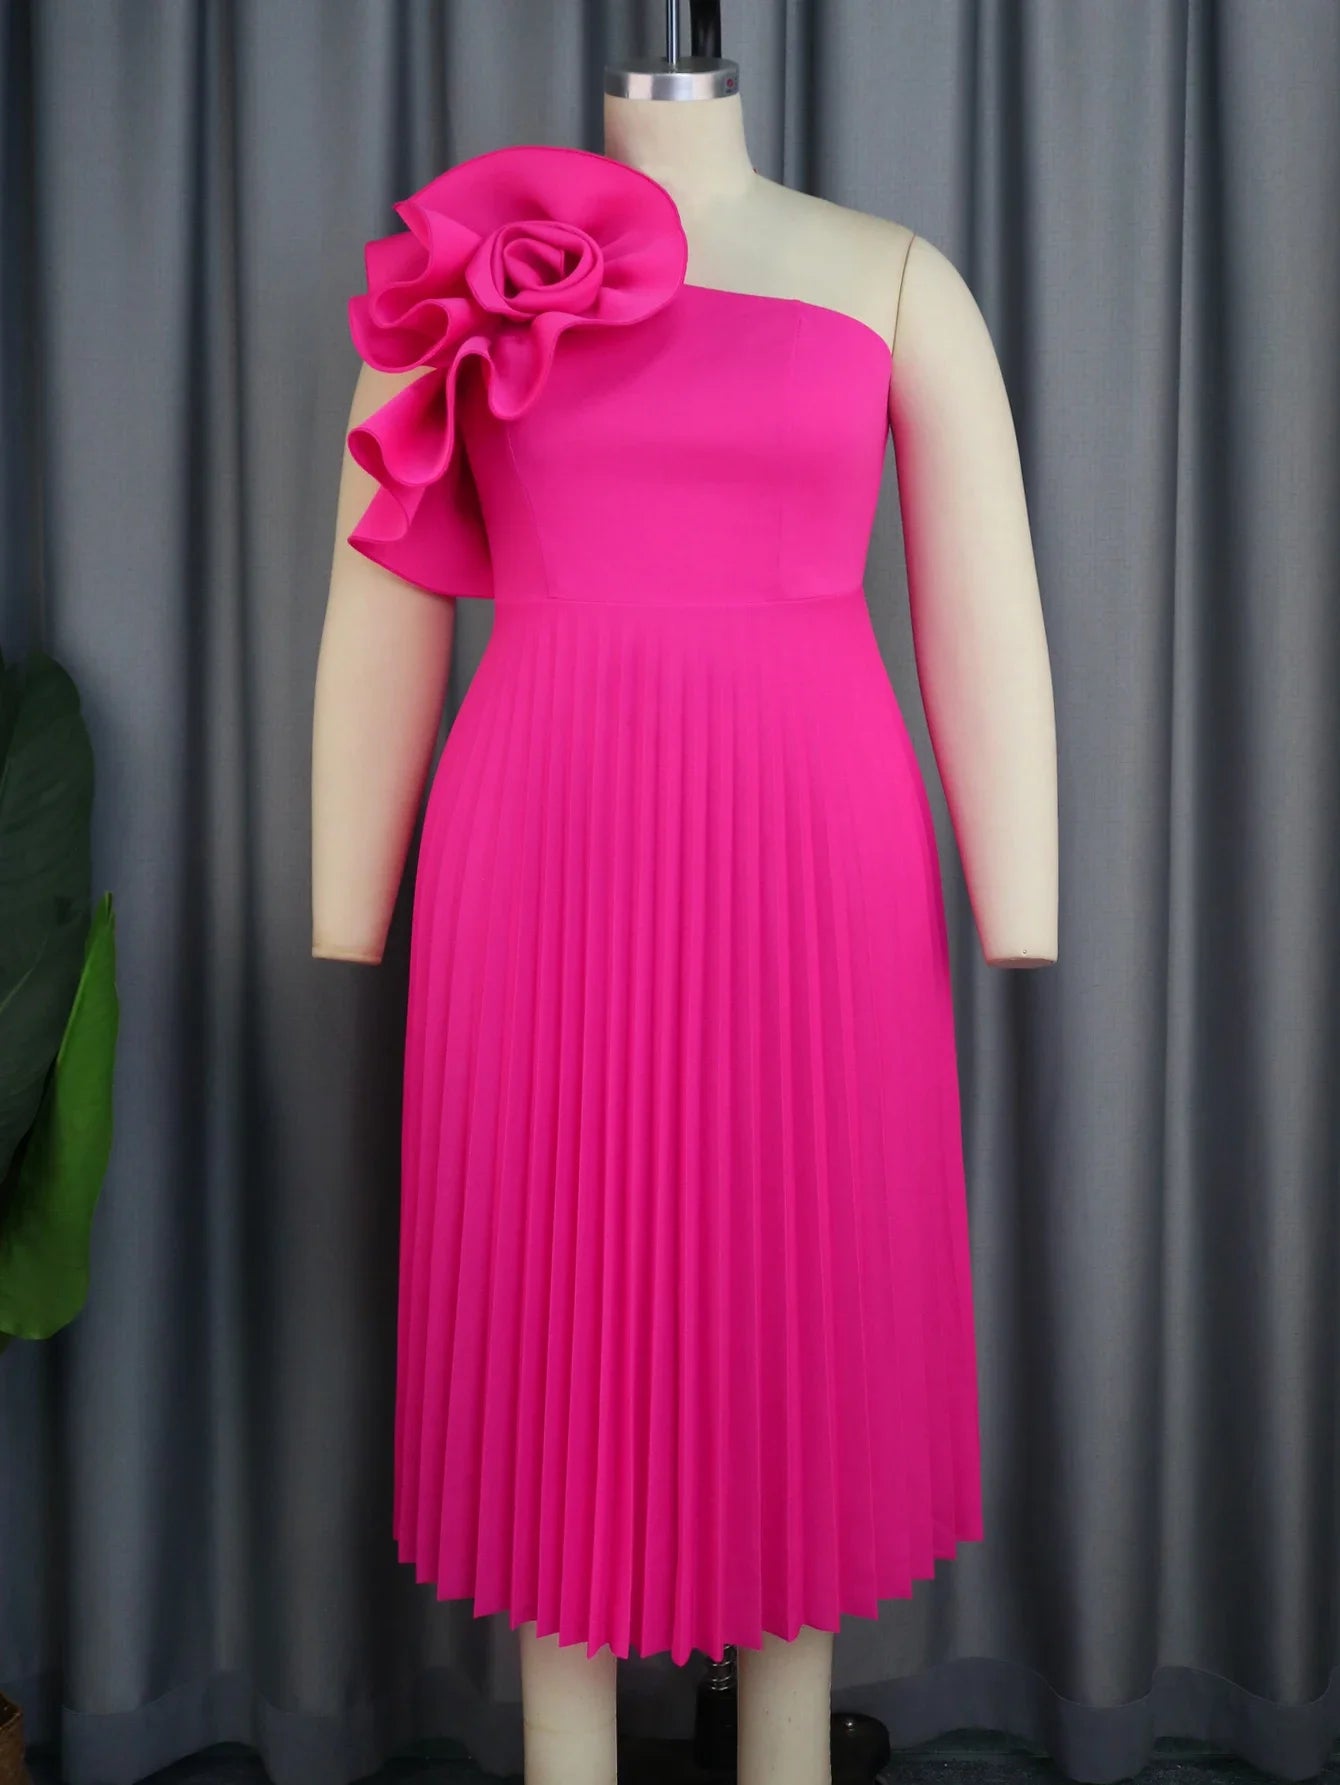 Pleated Party Dress Women Elegant Hot Pink Flower One Shoulder Midi Robes Autumn Sleeveless A Line Evening Birthday Plus Size